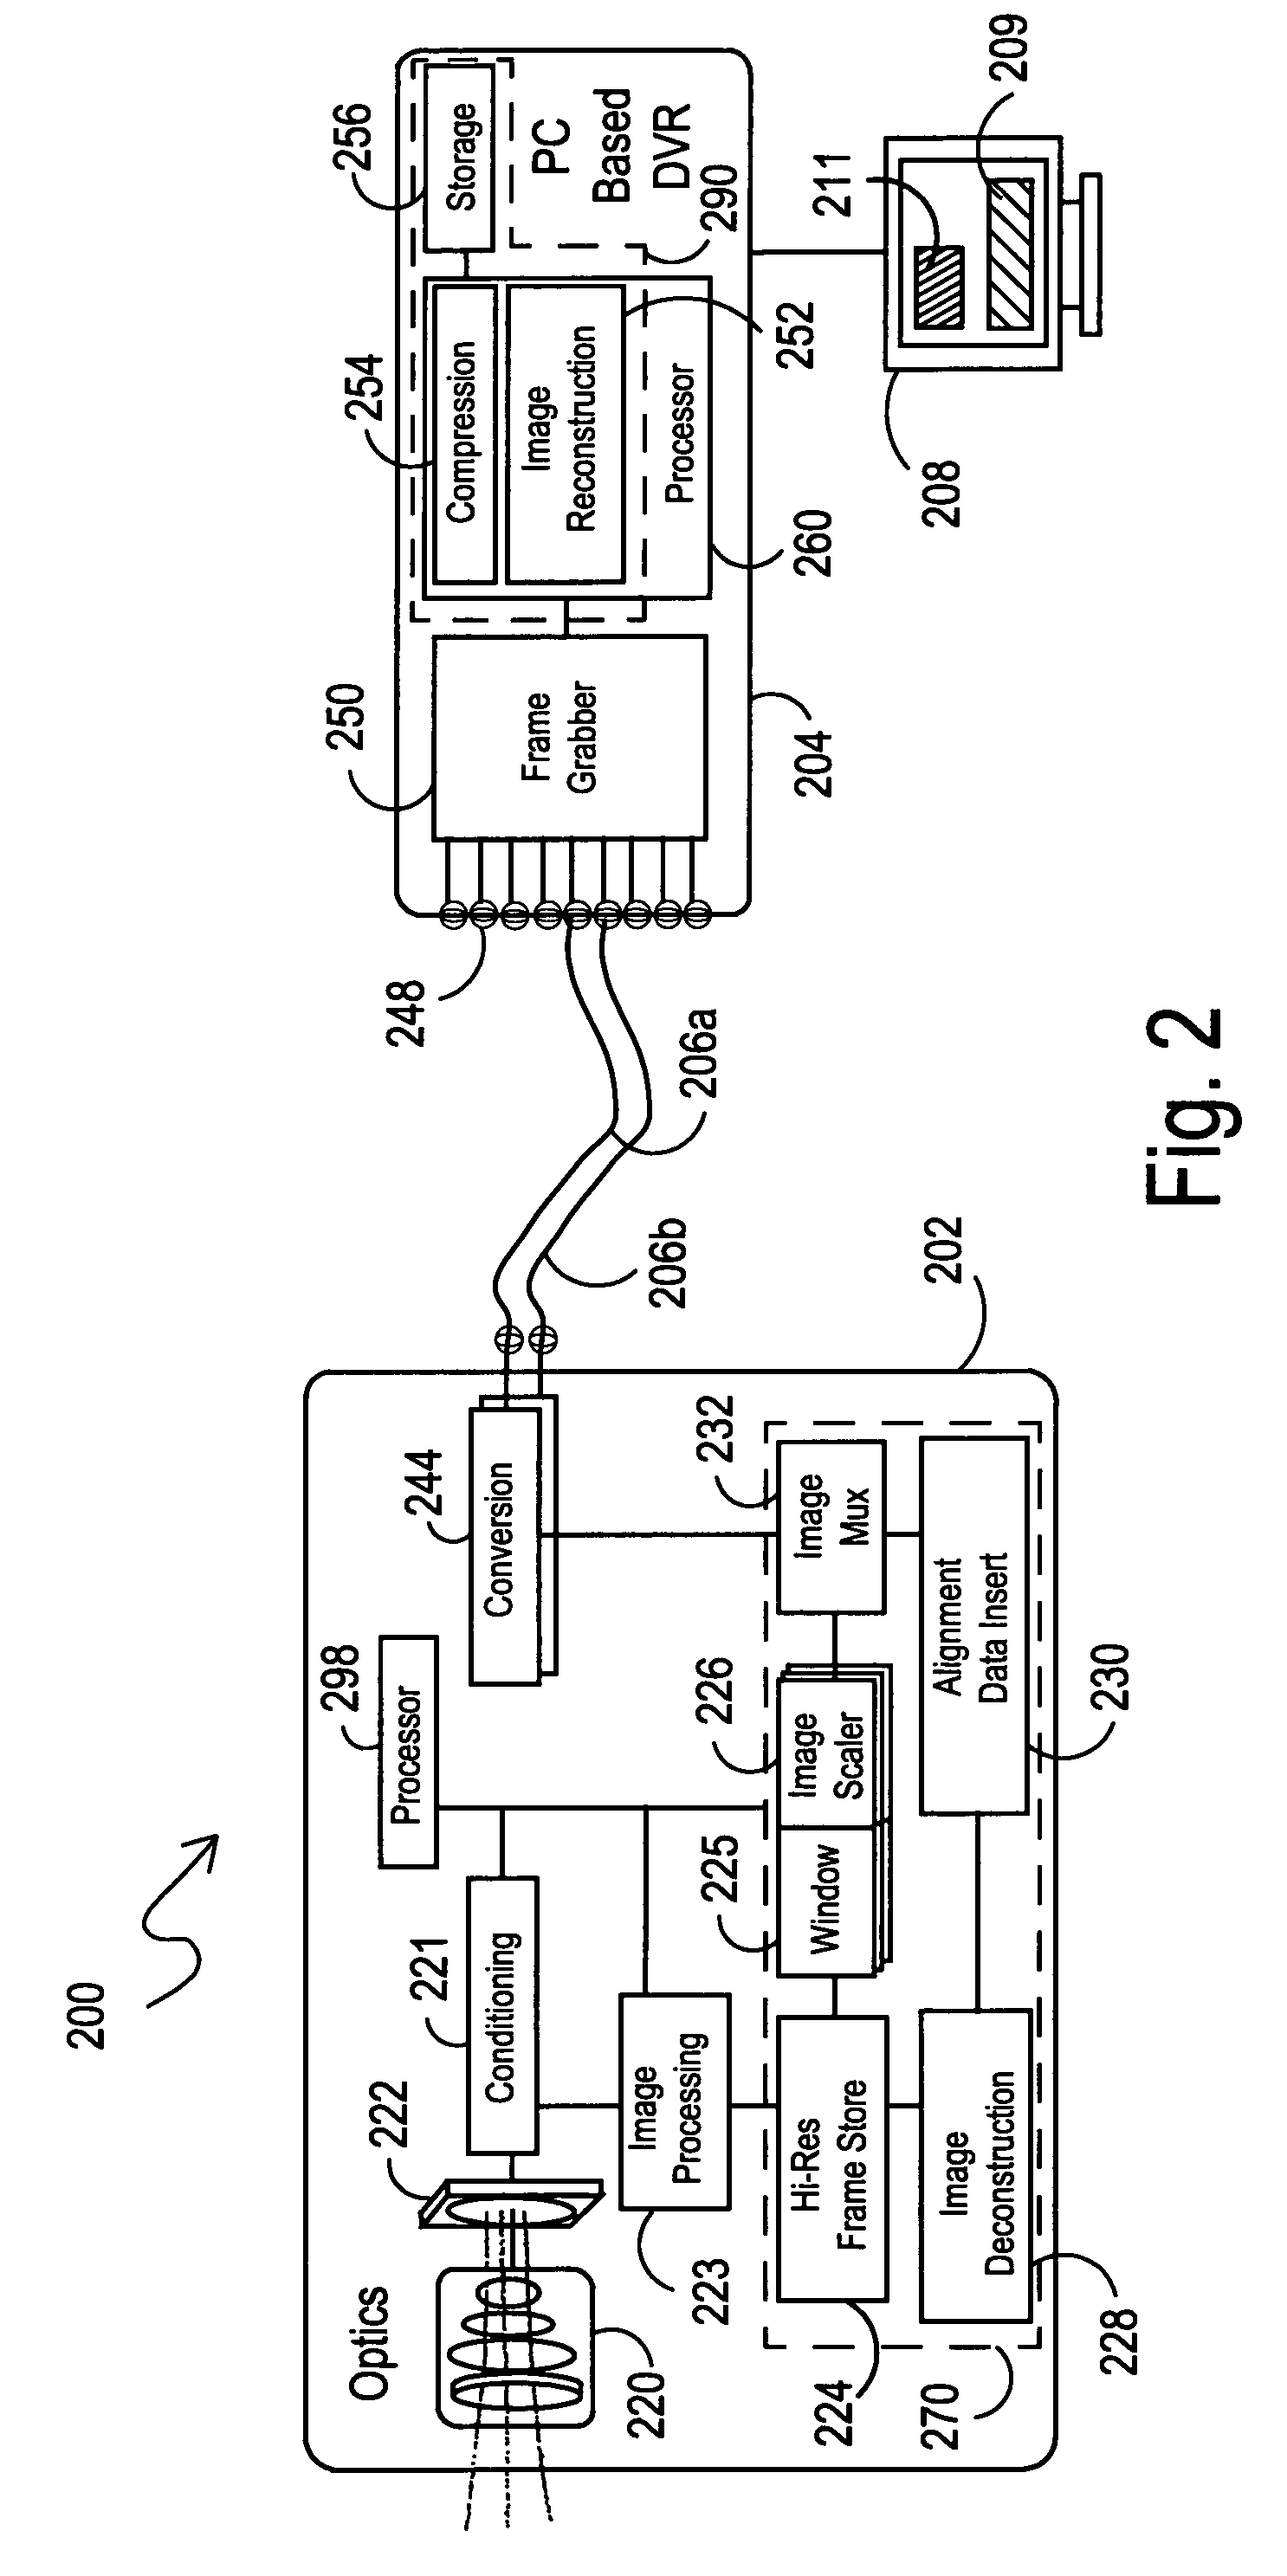 Systems and methods for multi-resolution image processing